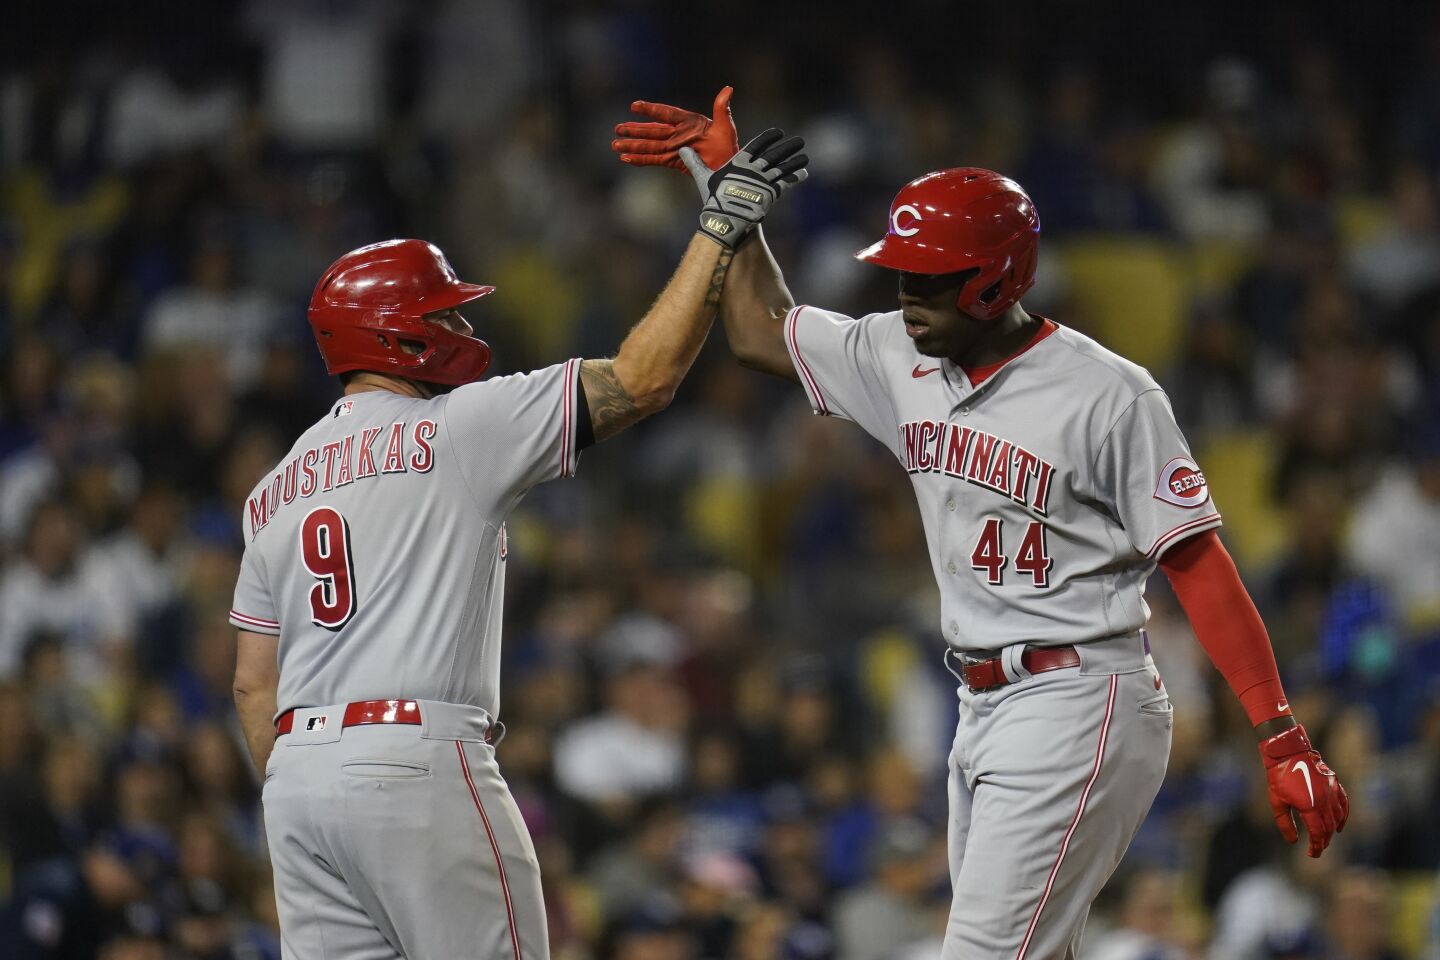 Cincinnati Reds (2-8, 5th in NL Central)The Reds have lost six straight games after dropping all four games over the weekend at Dodger Stadium and enter the week with the worst record in the majors. They rank last in the majors with a .254 on-base percentage and second-to-last with a 5.57 team ERA.